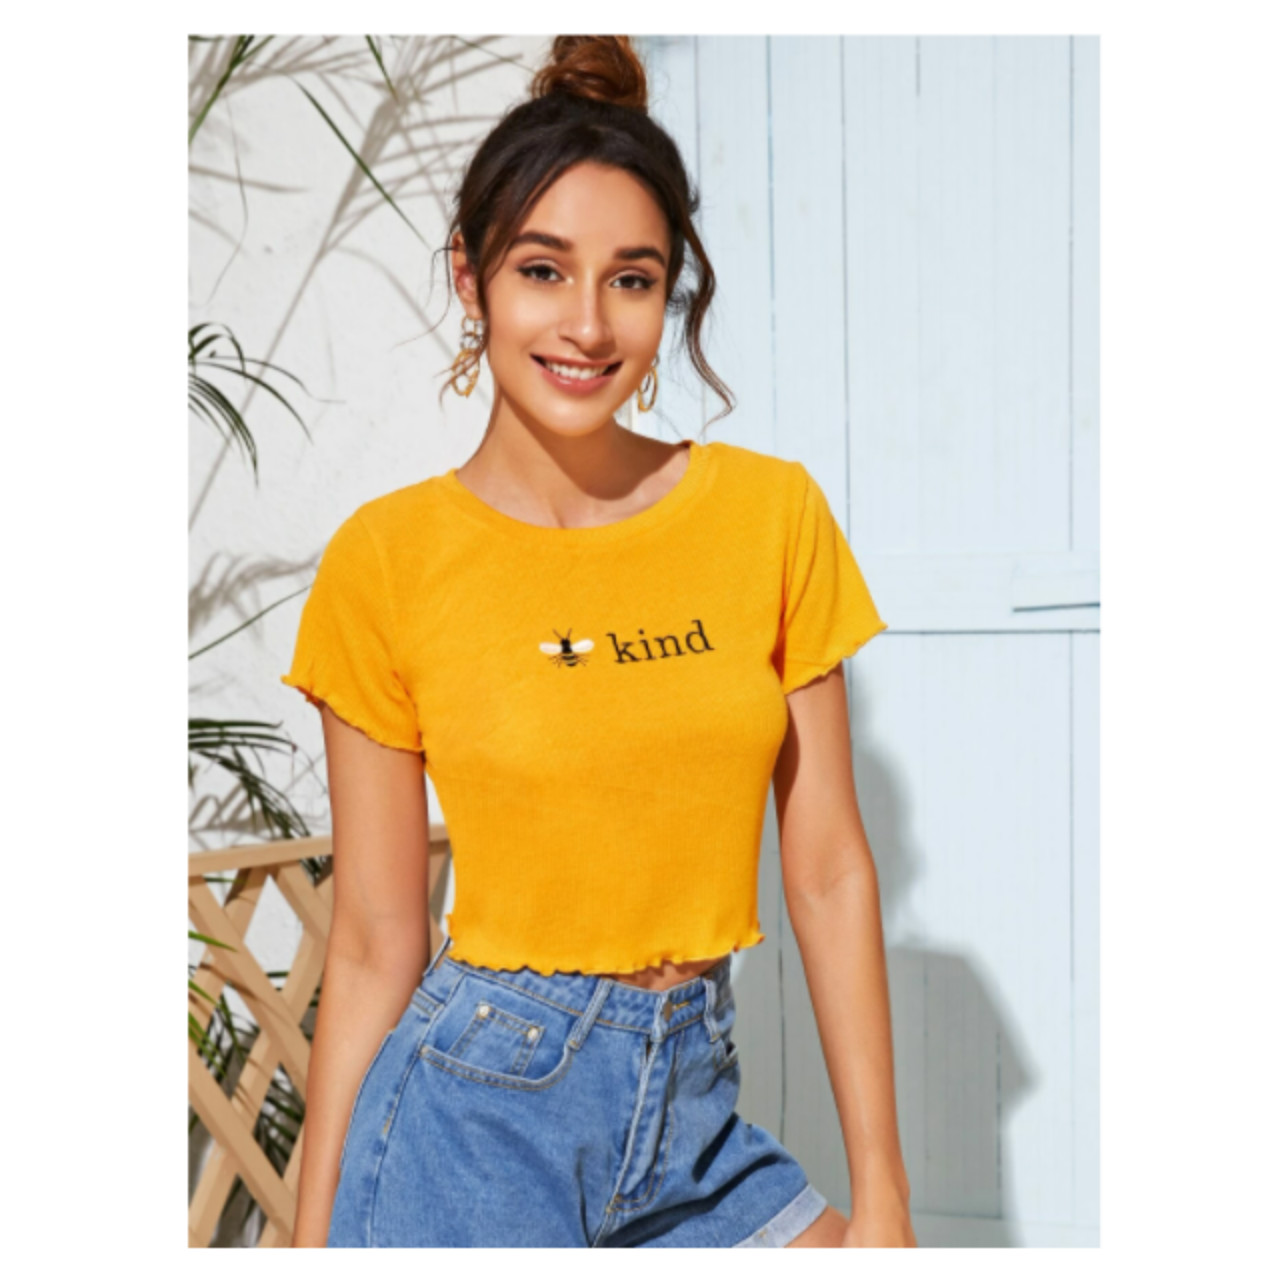 Bee & letter embroidery lettuce trim ribbed tee s